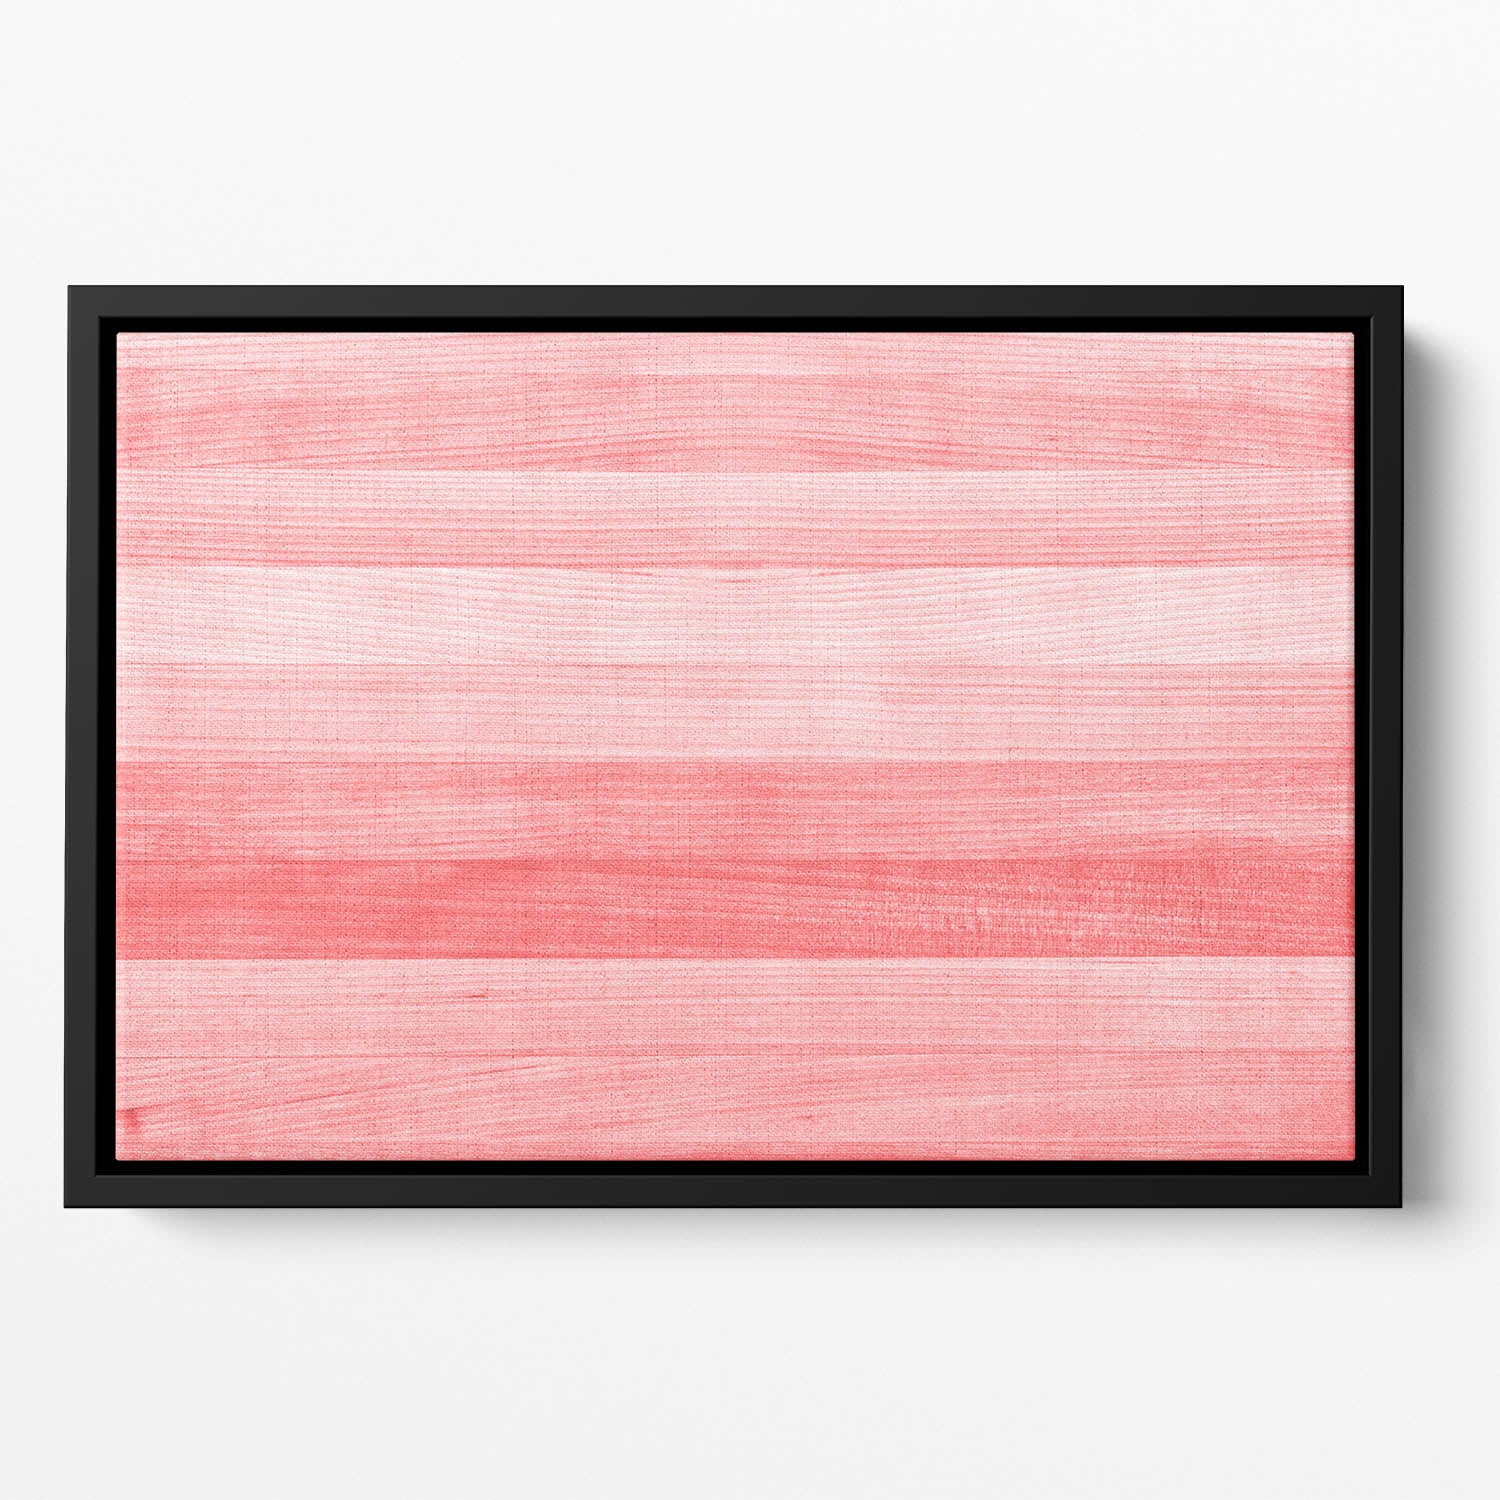 Coral pink or peach and salmon color Floating Framed Canvas